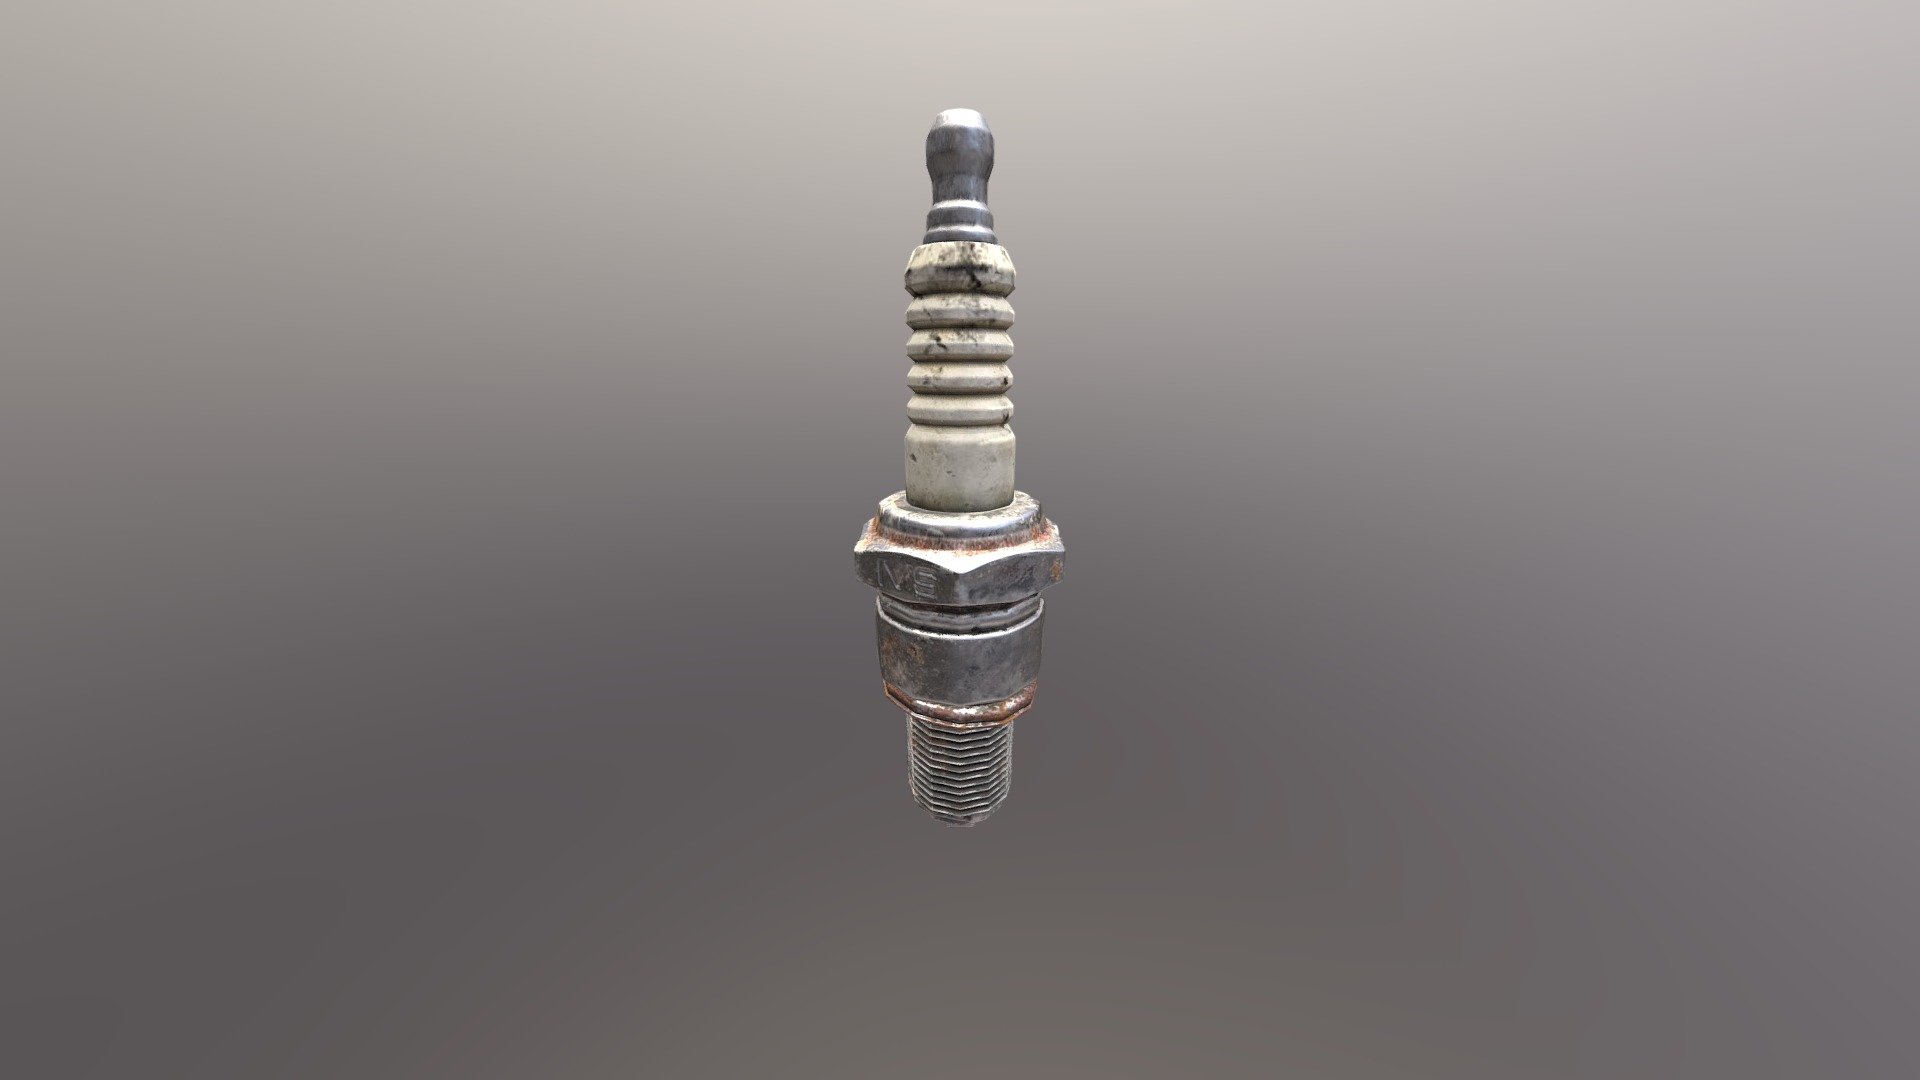 Lowpoly spark plug model. Simple 3d model of a spark plug with baked textures from a high poly model 3d model